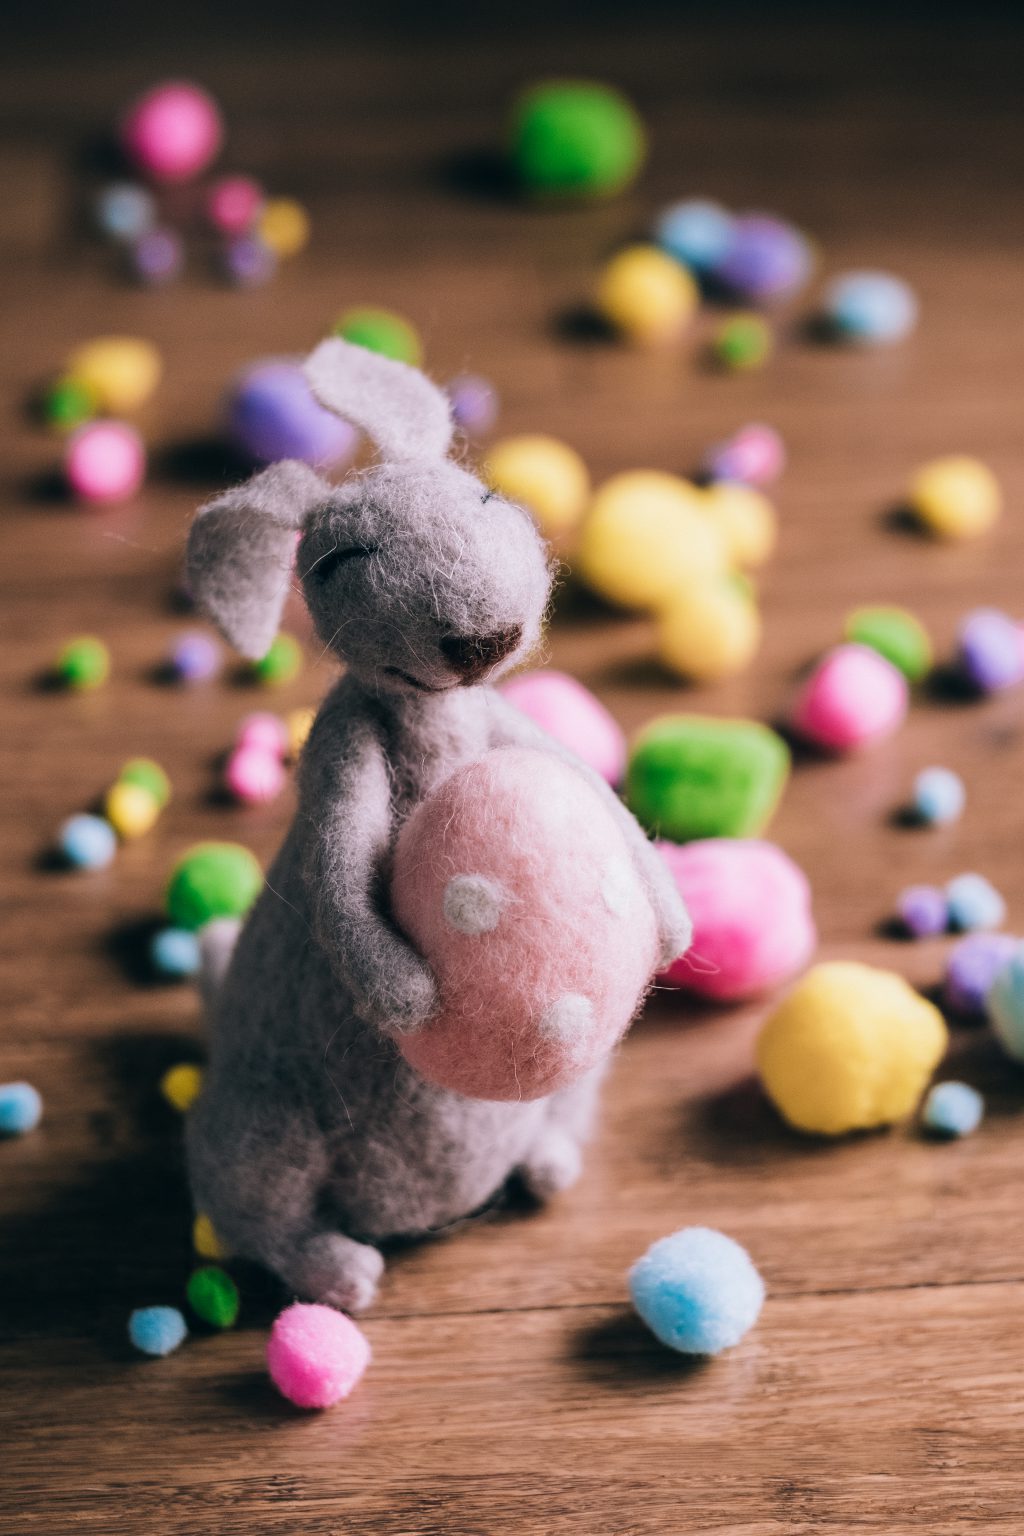 Easter bunny 7 - free stock photo